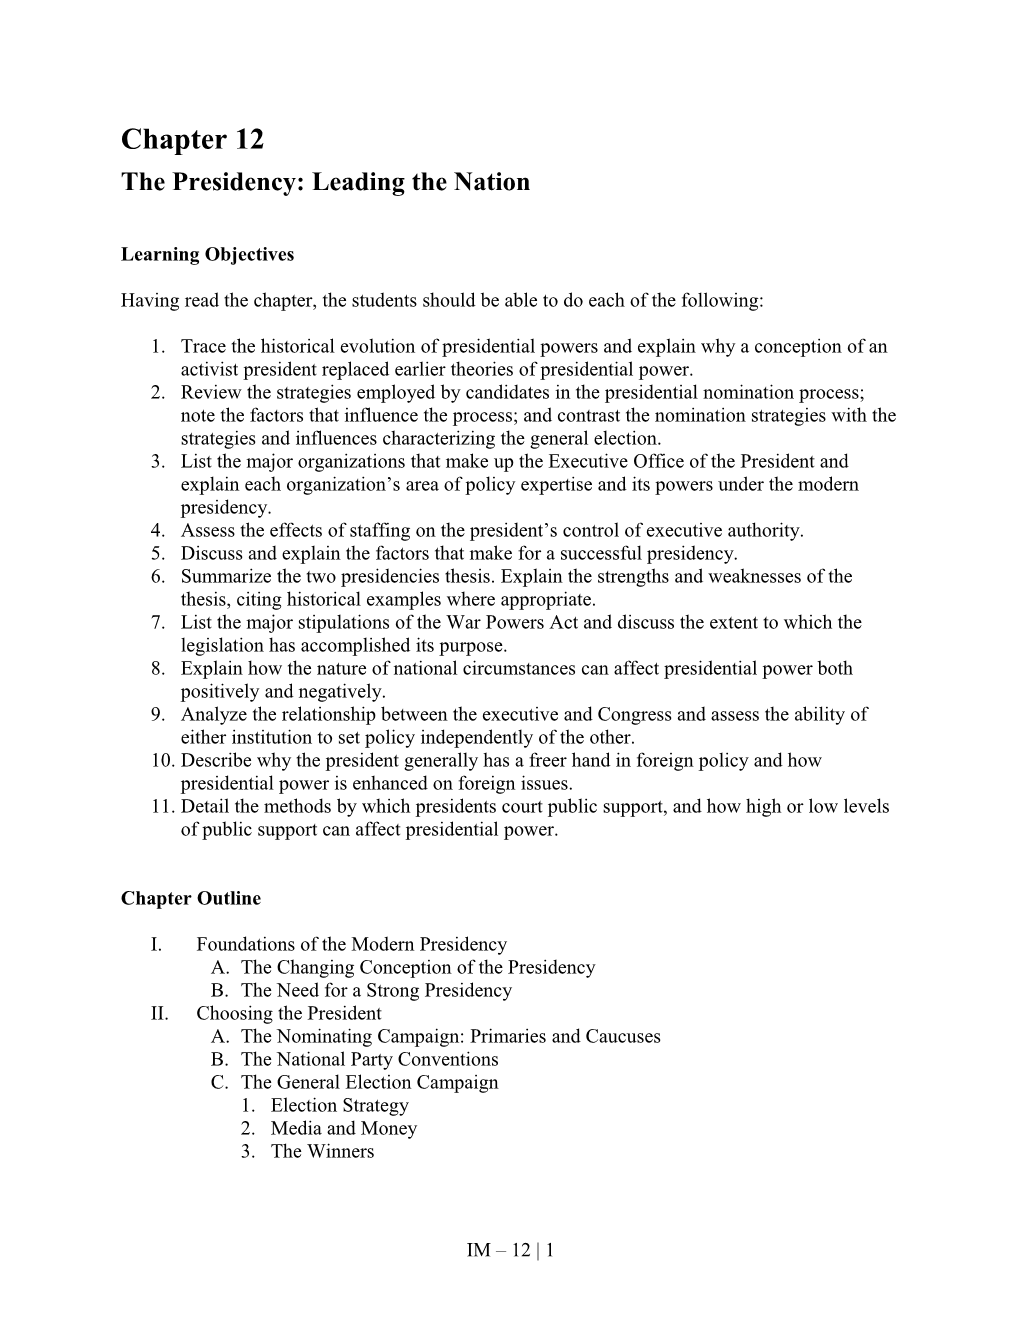 The Presidency: Leading the Nation